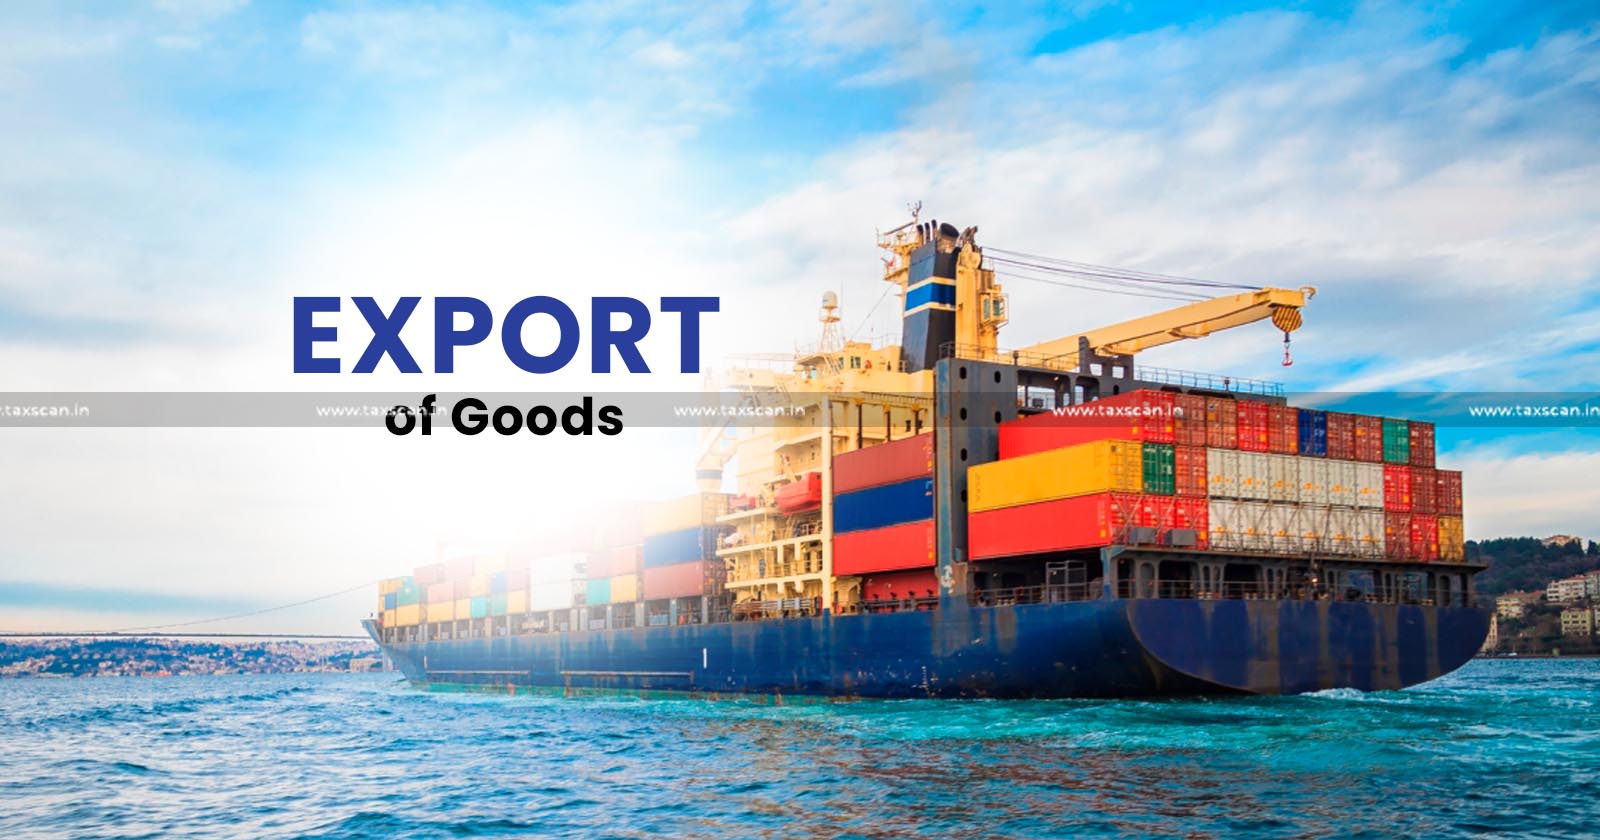 CESTAT allows Service Tax Exemption - Service Tax allowable in respect of GTA services - Export of Goods to HEG Ltd - TAXSCAN